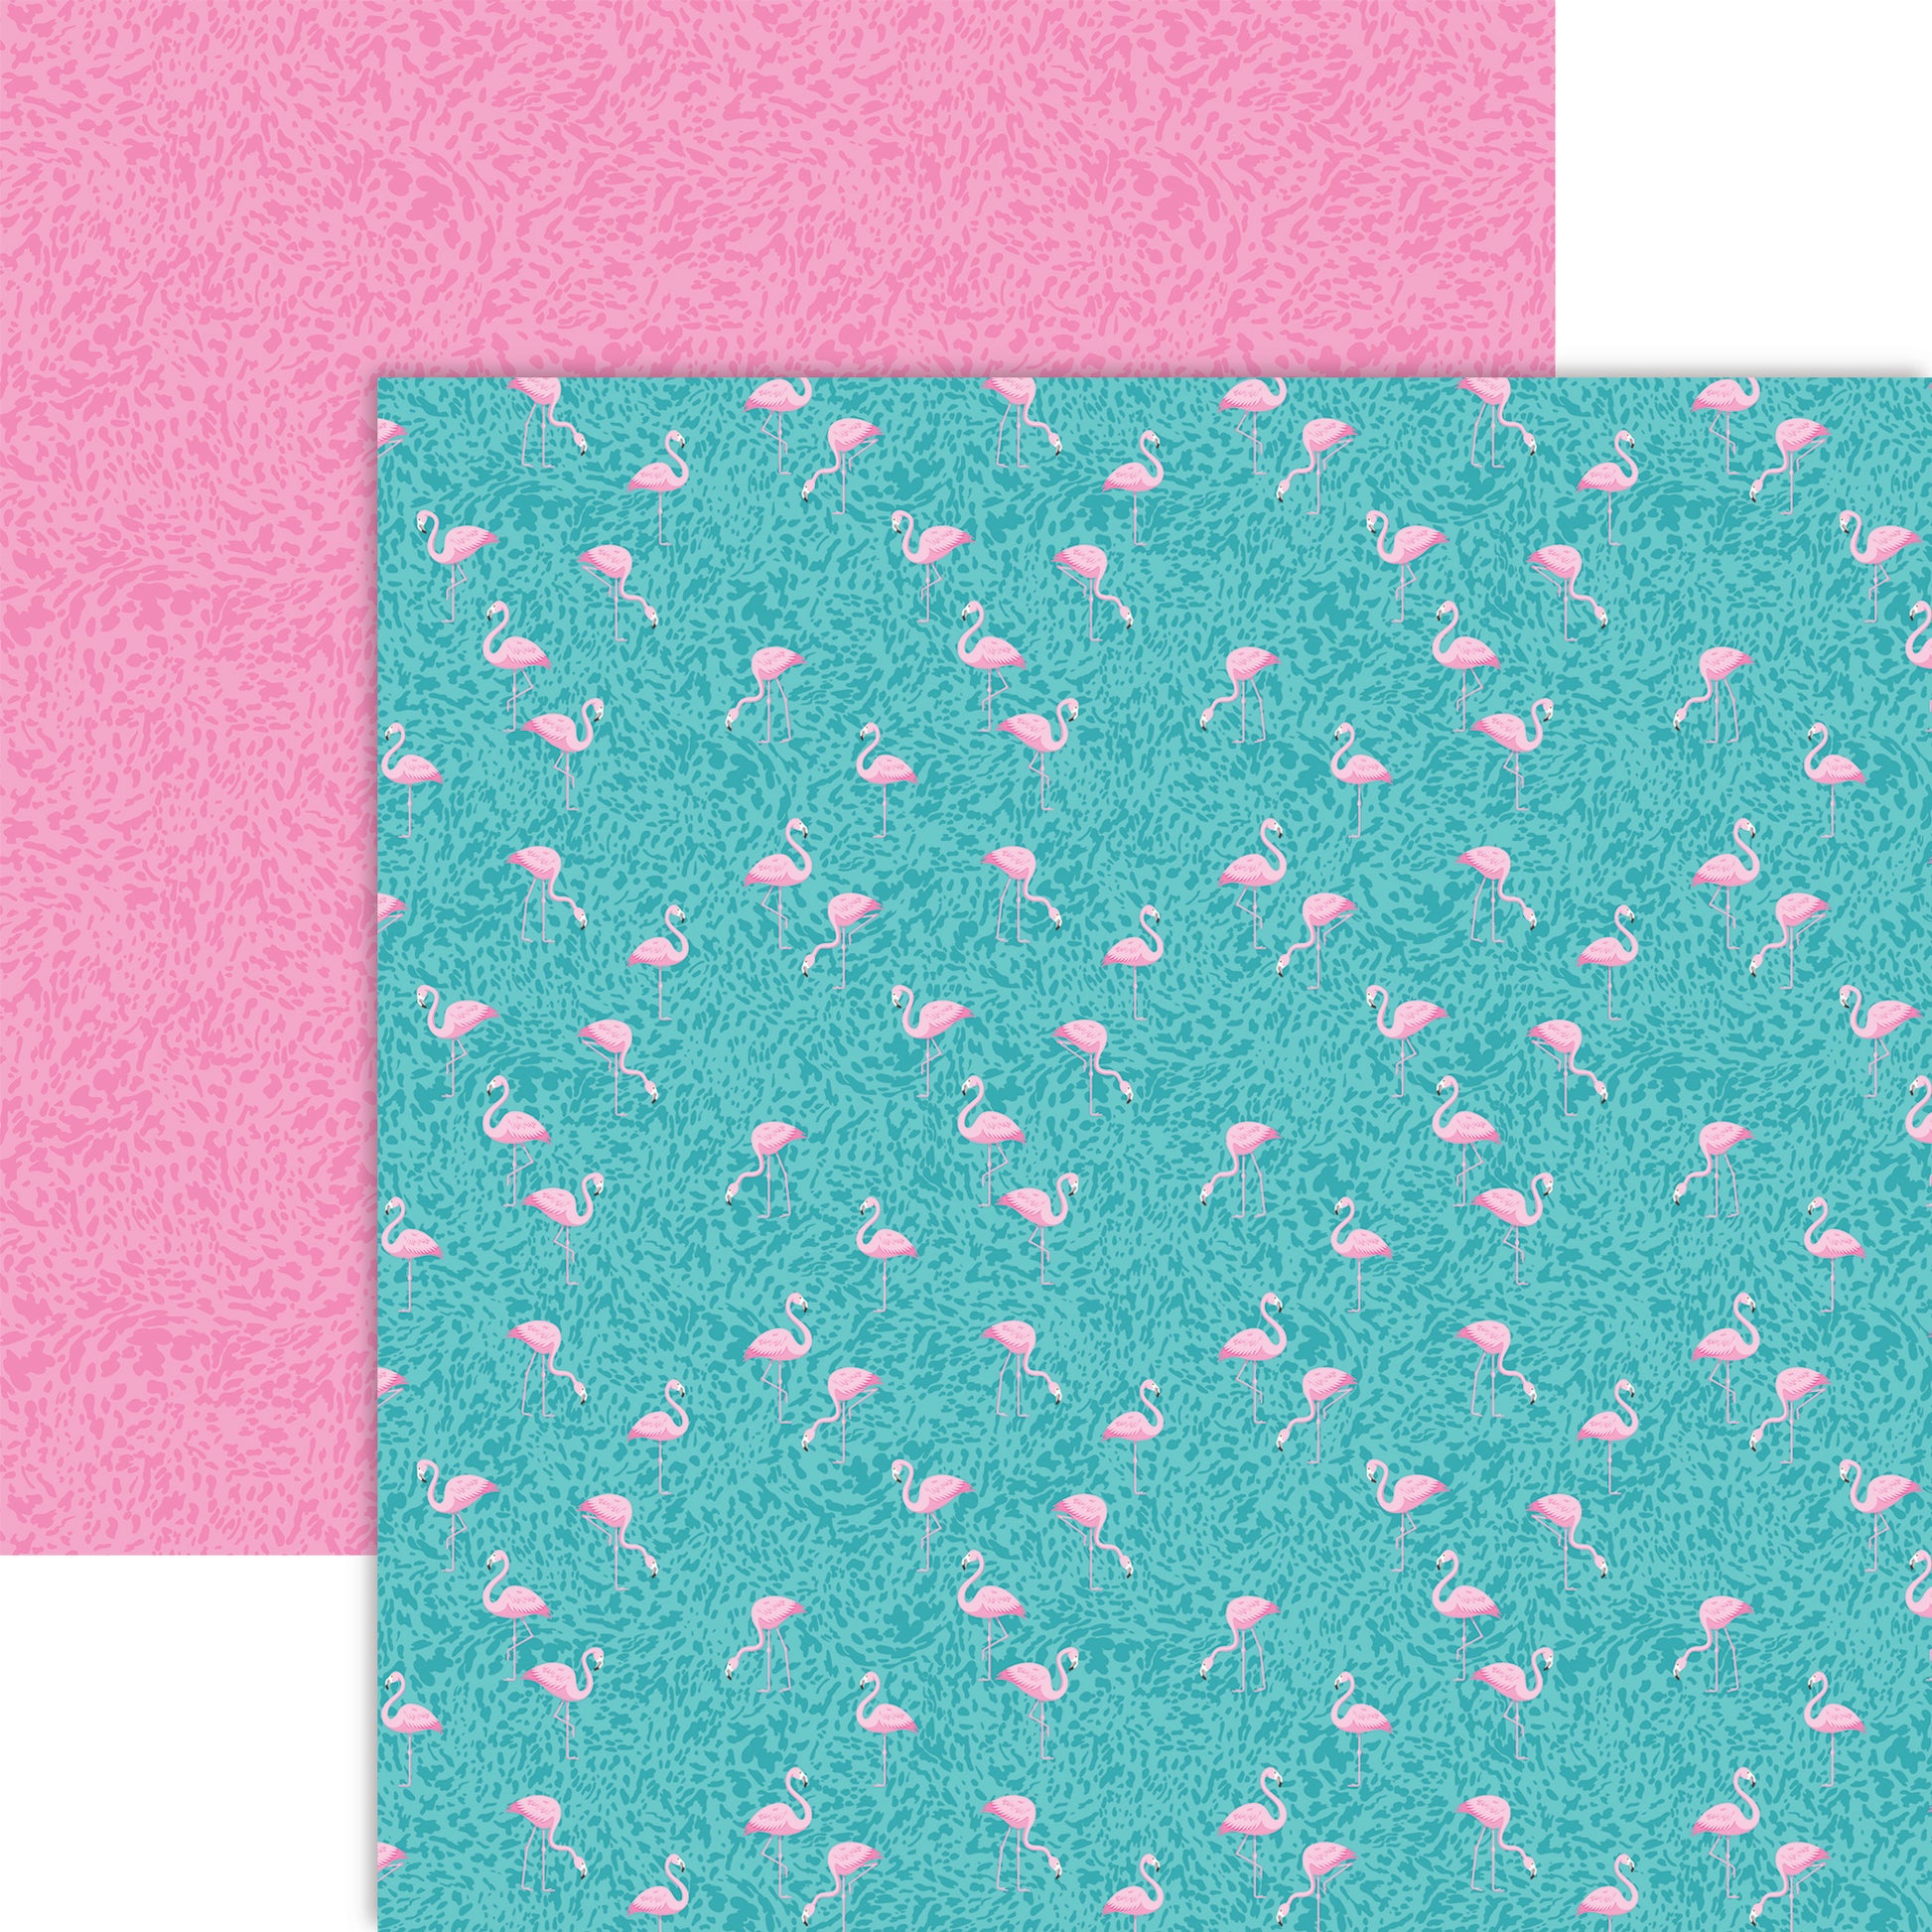 Poolside Vibes - Officially Summer Scrapbook Paper by Reminisce